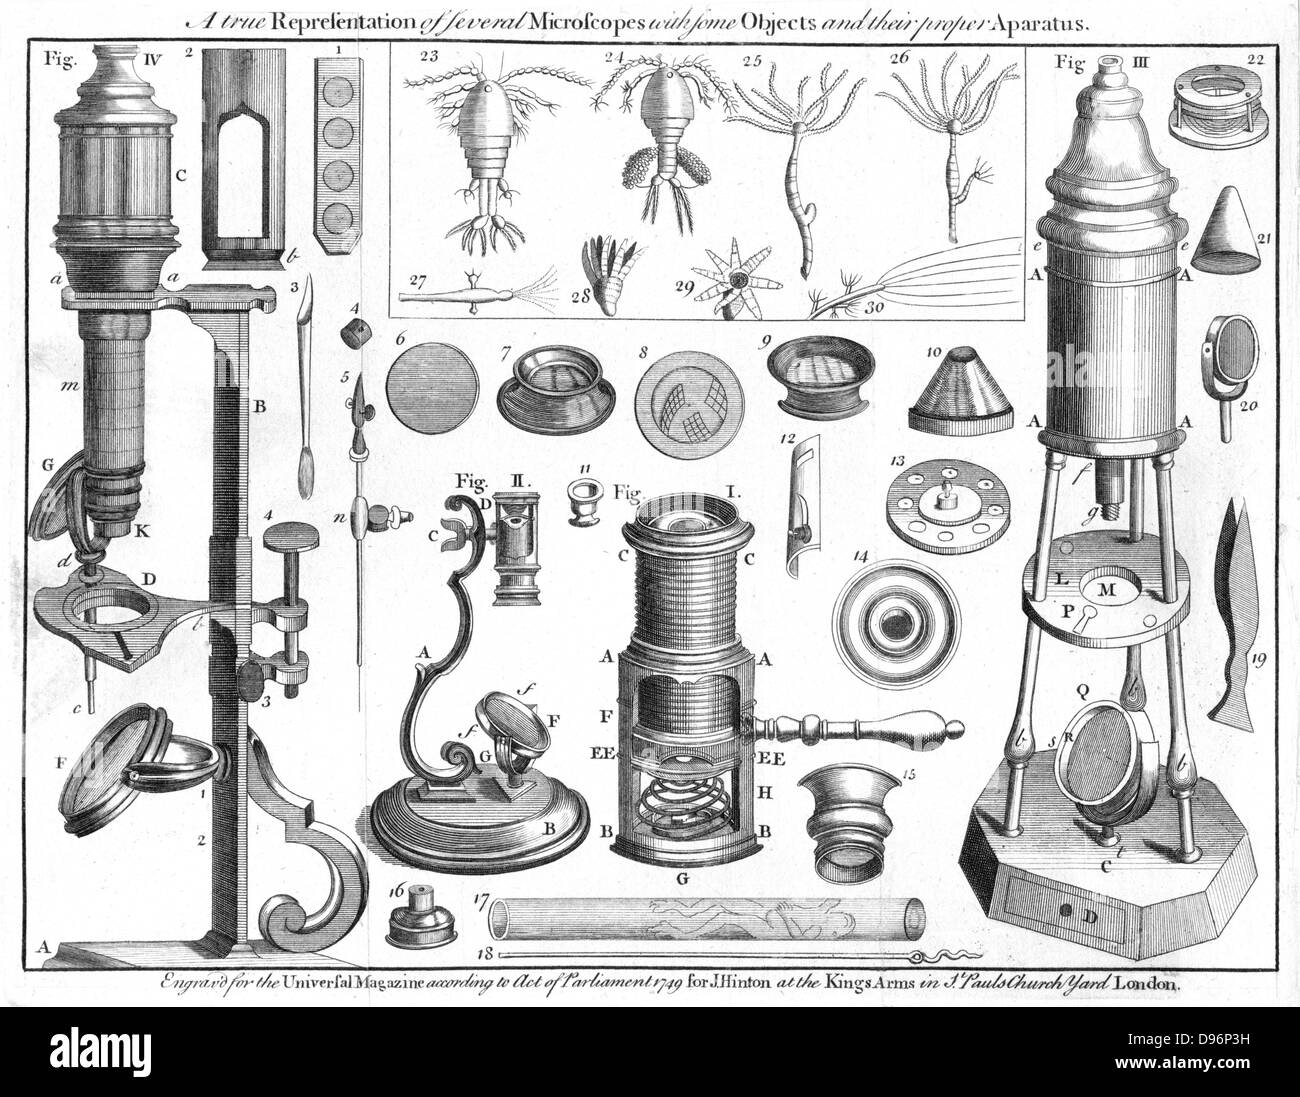 Microscopes and microscopical objects, 1750. I: Wilson's pocket microscope. II: Scroll microscope. III: Tripod microscope - improved form of Marshall's double microscope. IV: Ascough's compound microscope. Figs 23/30: Representations of animalcules discovered by microscope in samples of ditch water and described in Royal Society 'Philosophical Transactions' No 283. From 'The Universal Magazine', (London, 1750). Stock Photo